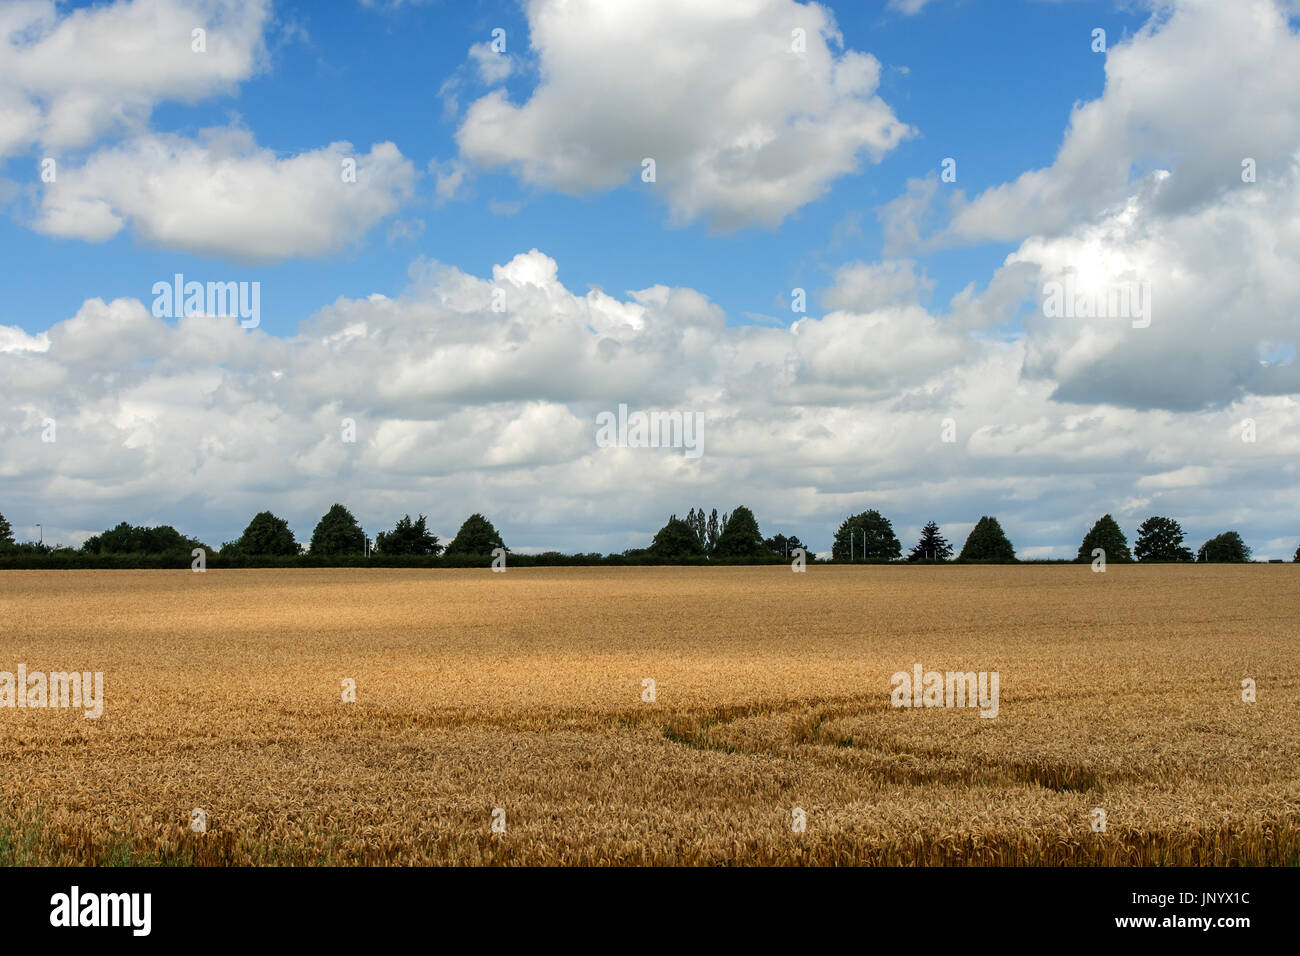 Burton Lazars, Leicestershire, UK. 31th July 2017. UK Weather. Golden fields of corn, blue sky white clouds, wild mushrooms, butterflies and walkers on a bright sunny day in a rural village Leciestershire wolds. Credit: Clifford Norton/Alamy Live News Stock Photo